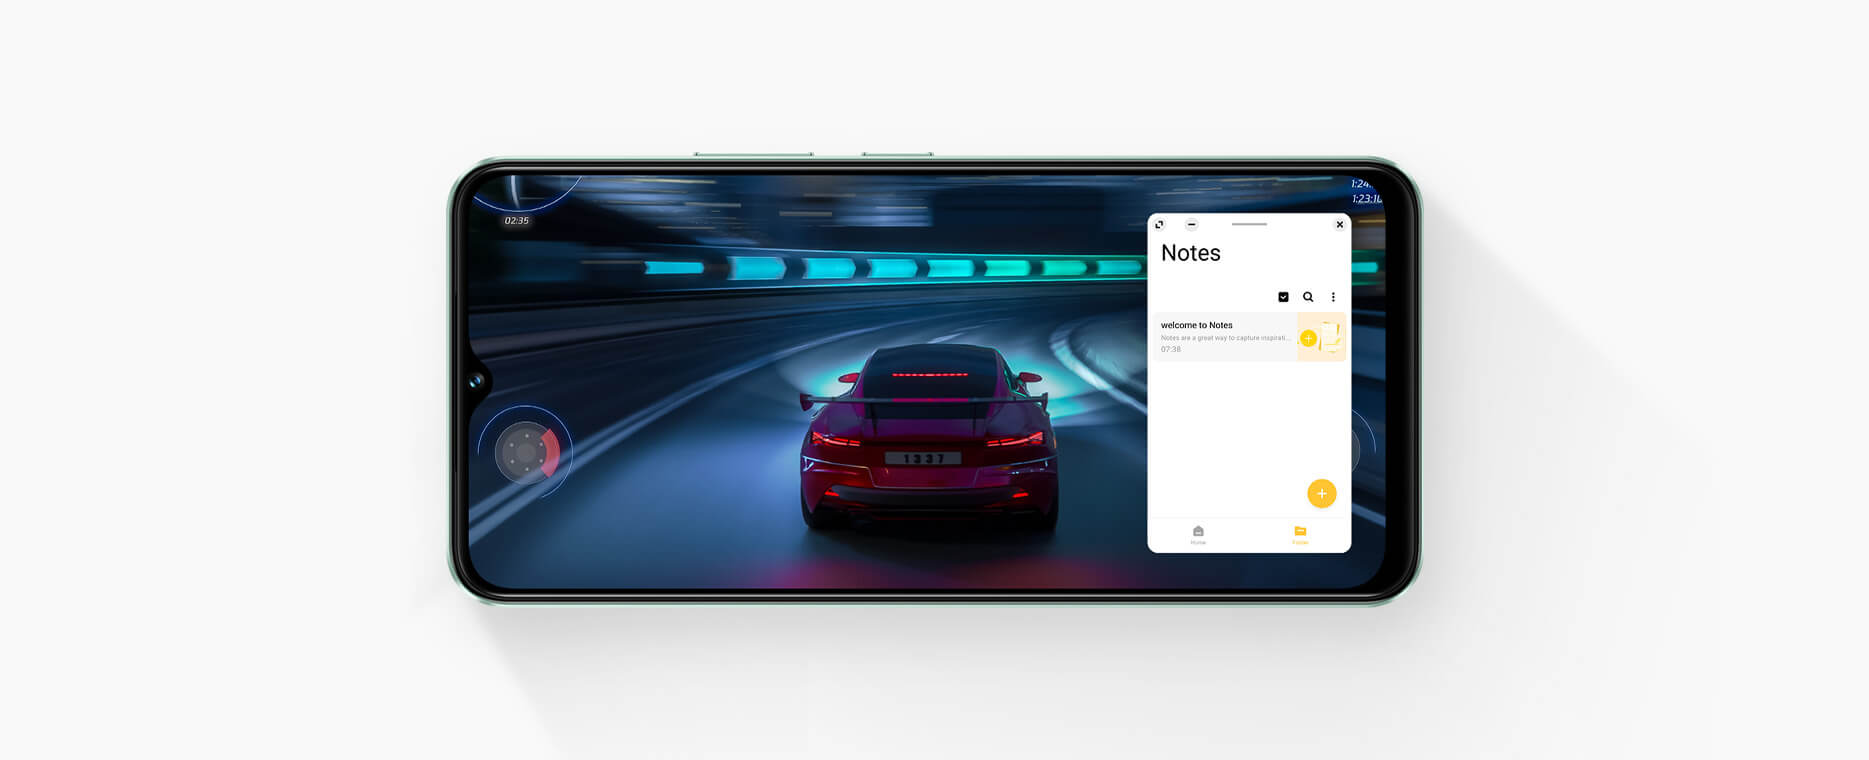 vivo Y03 with game picture-in-picture function